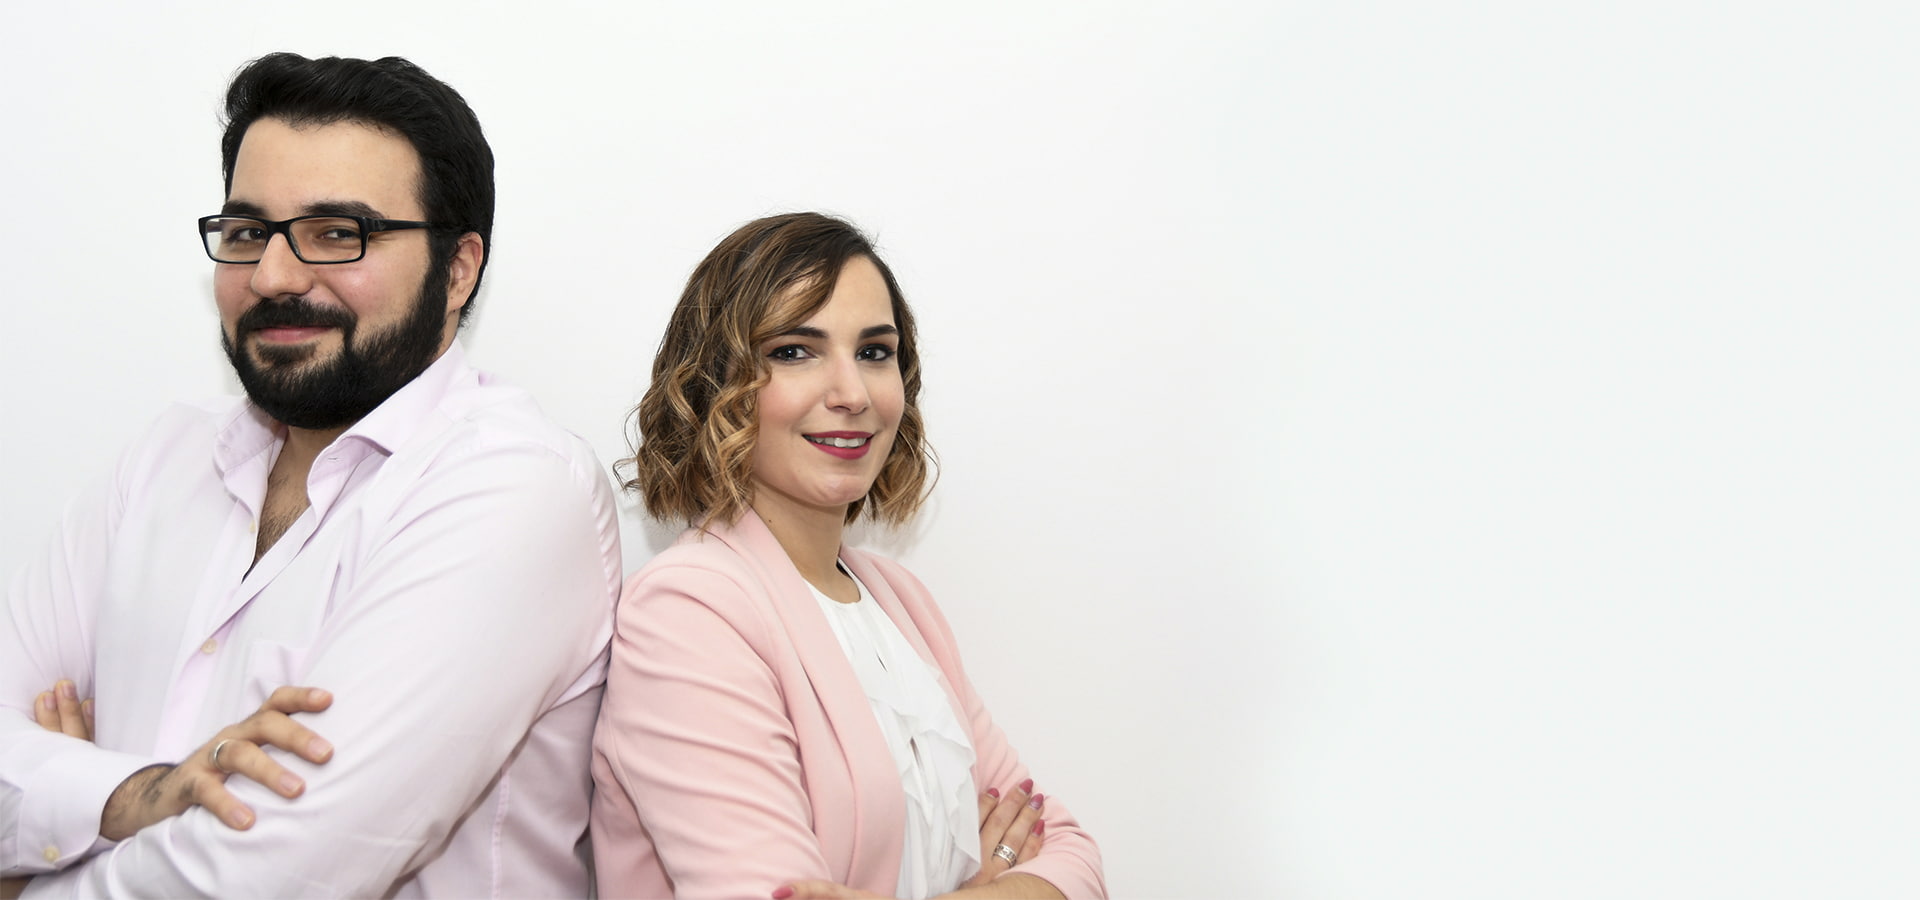 Photo of the company's co-founders, Diogo Ferreira and Helena Sousa